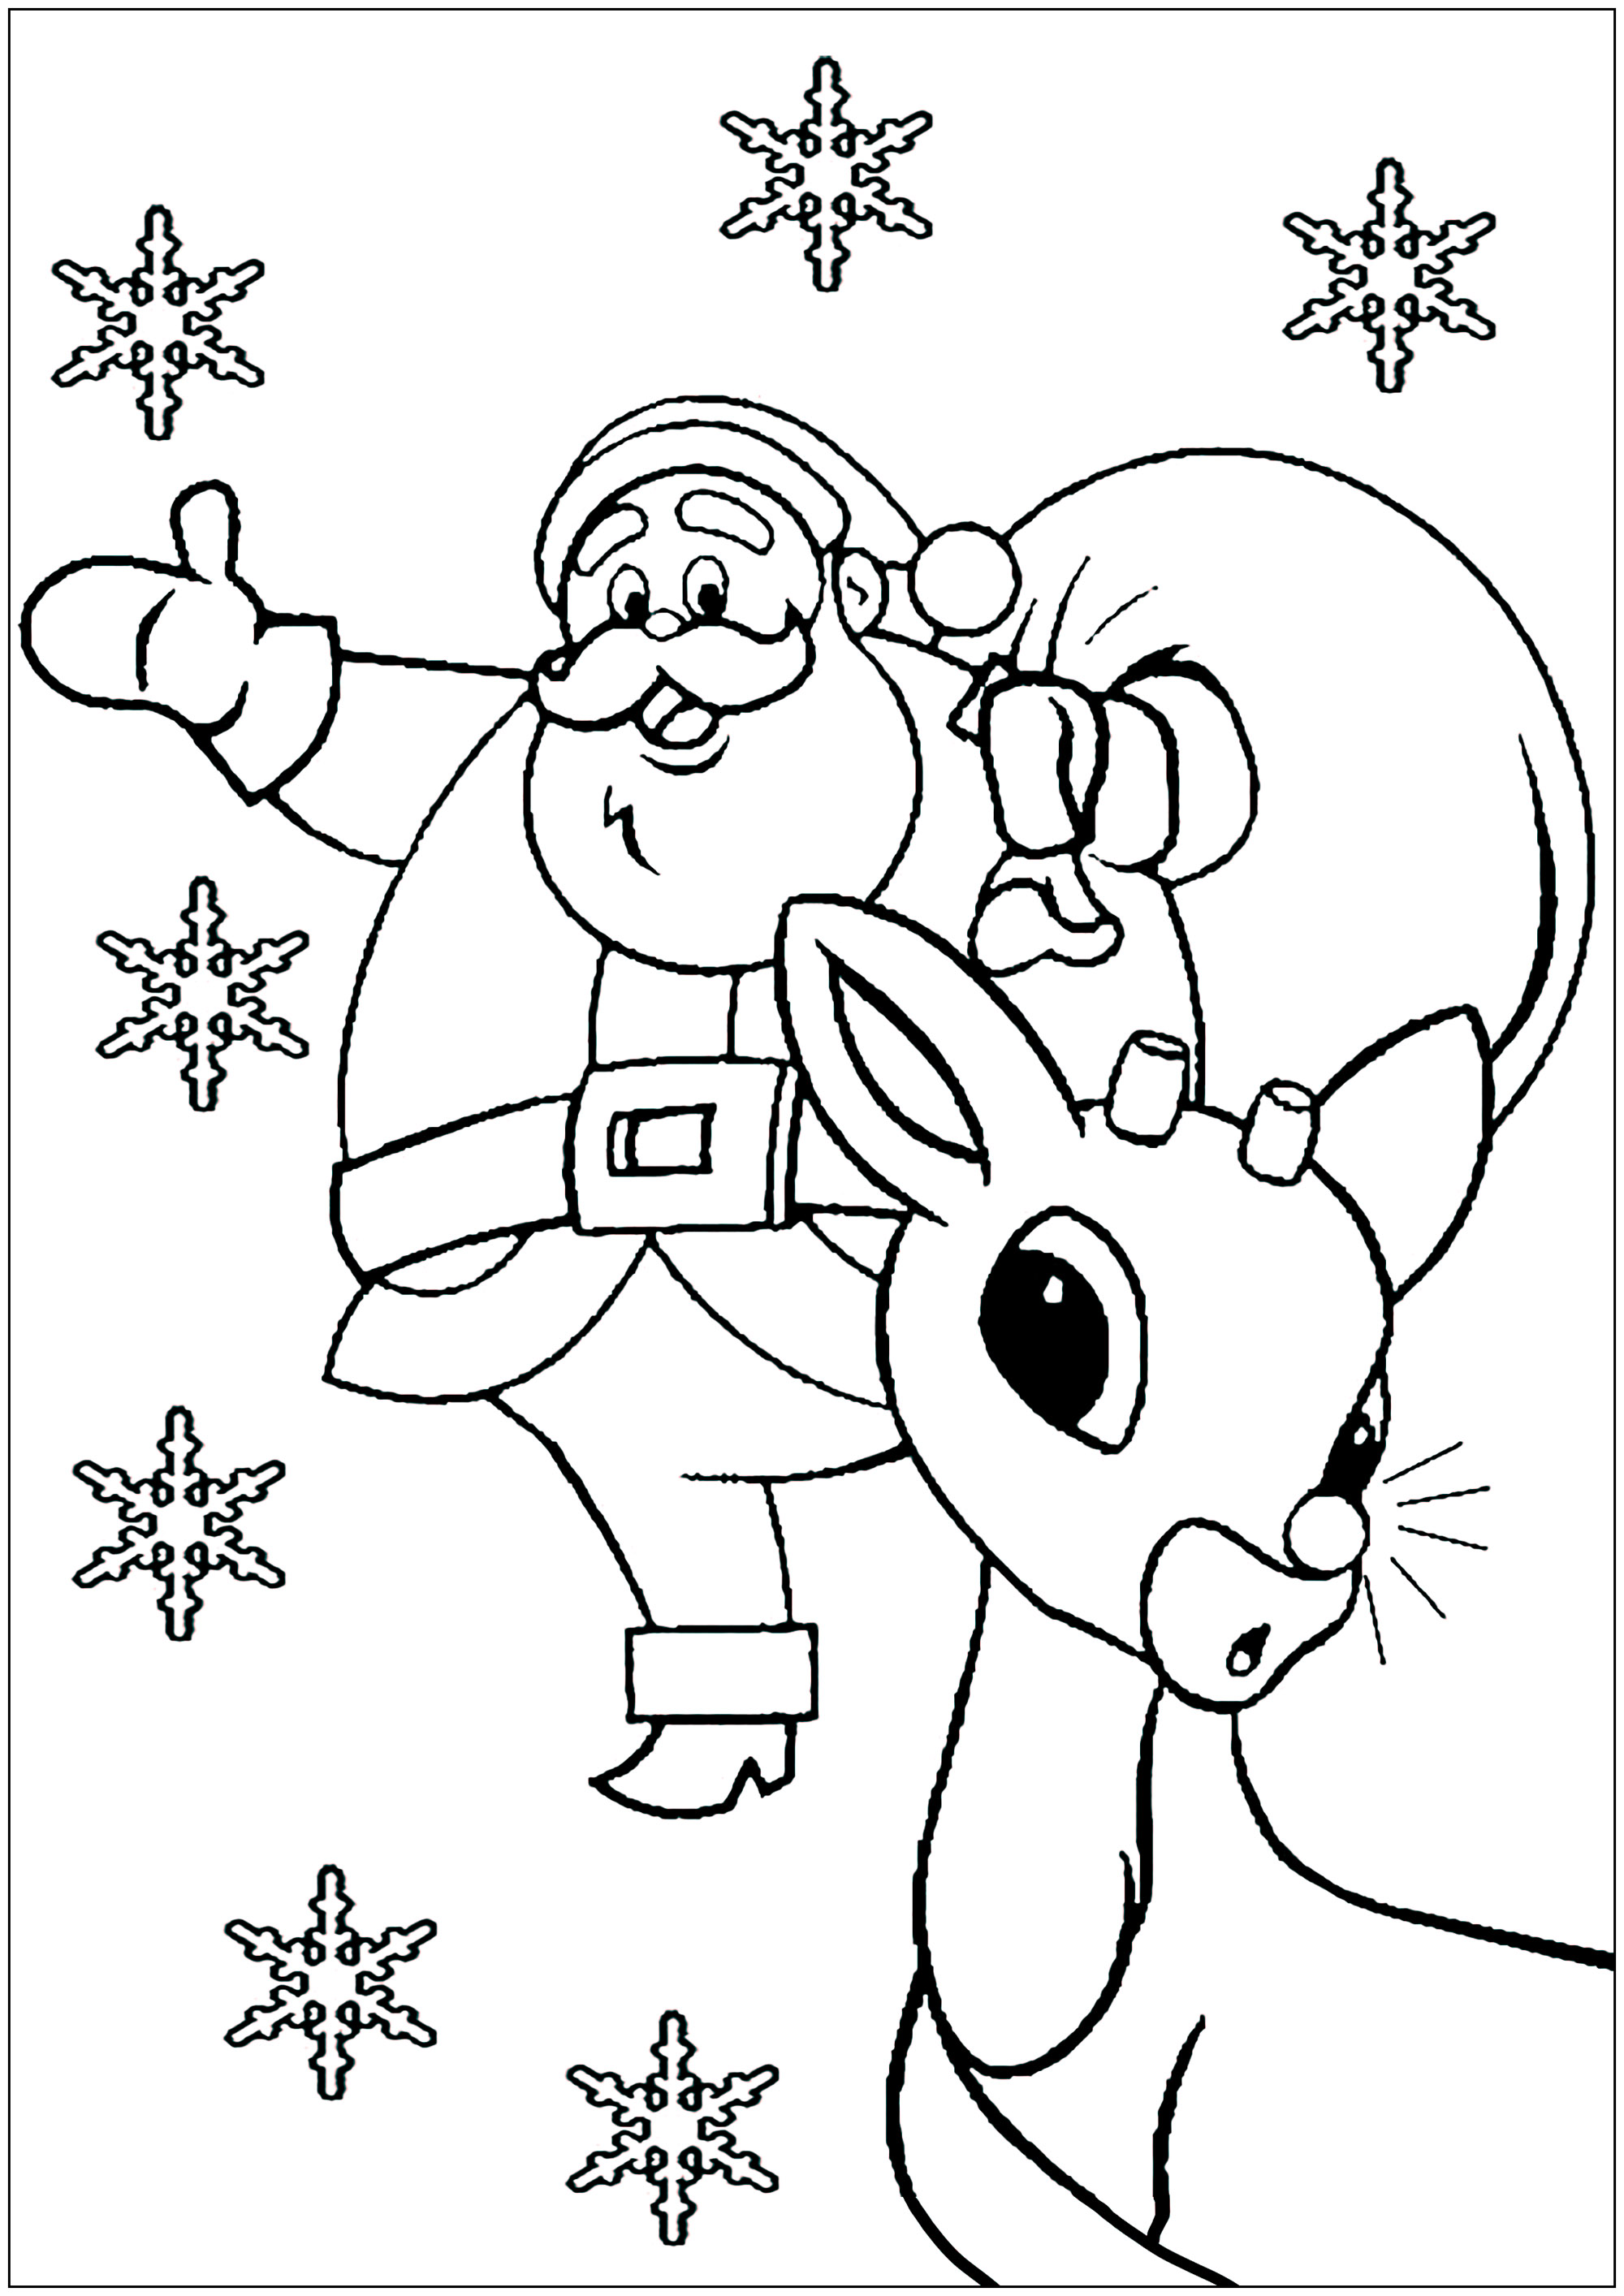 Rudolph the Red-Nosed Reindeer and Santa Claus